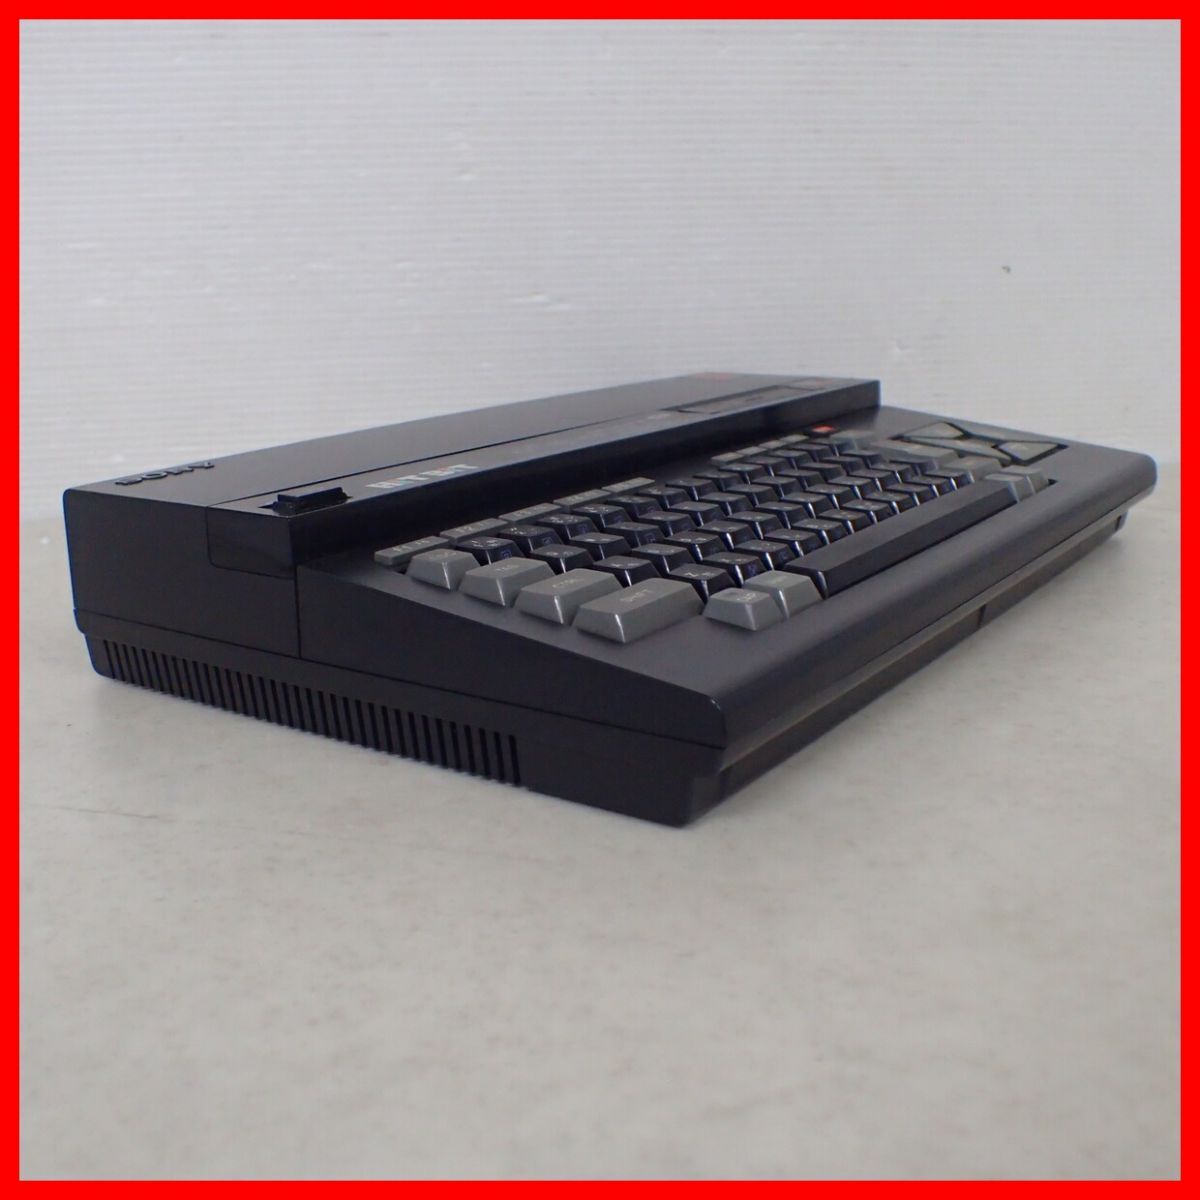 *SONY Home computer MSX HiTBiT HB-75 body only Sony present condition goods [20